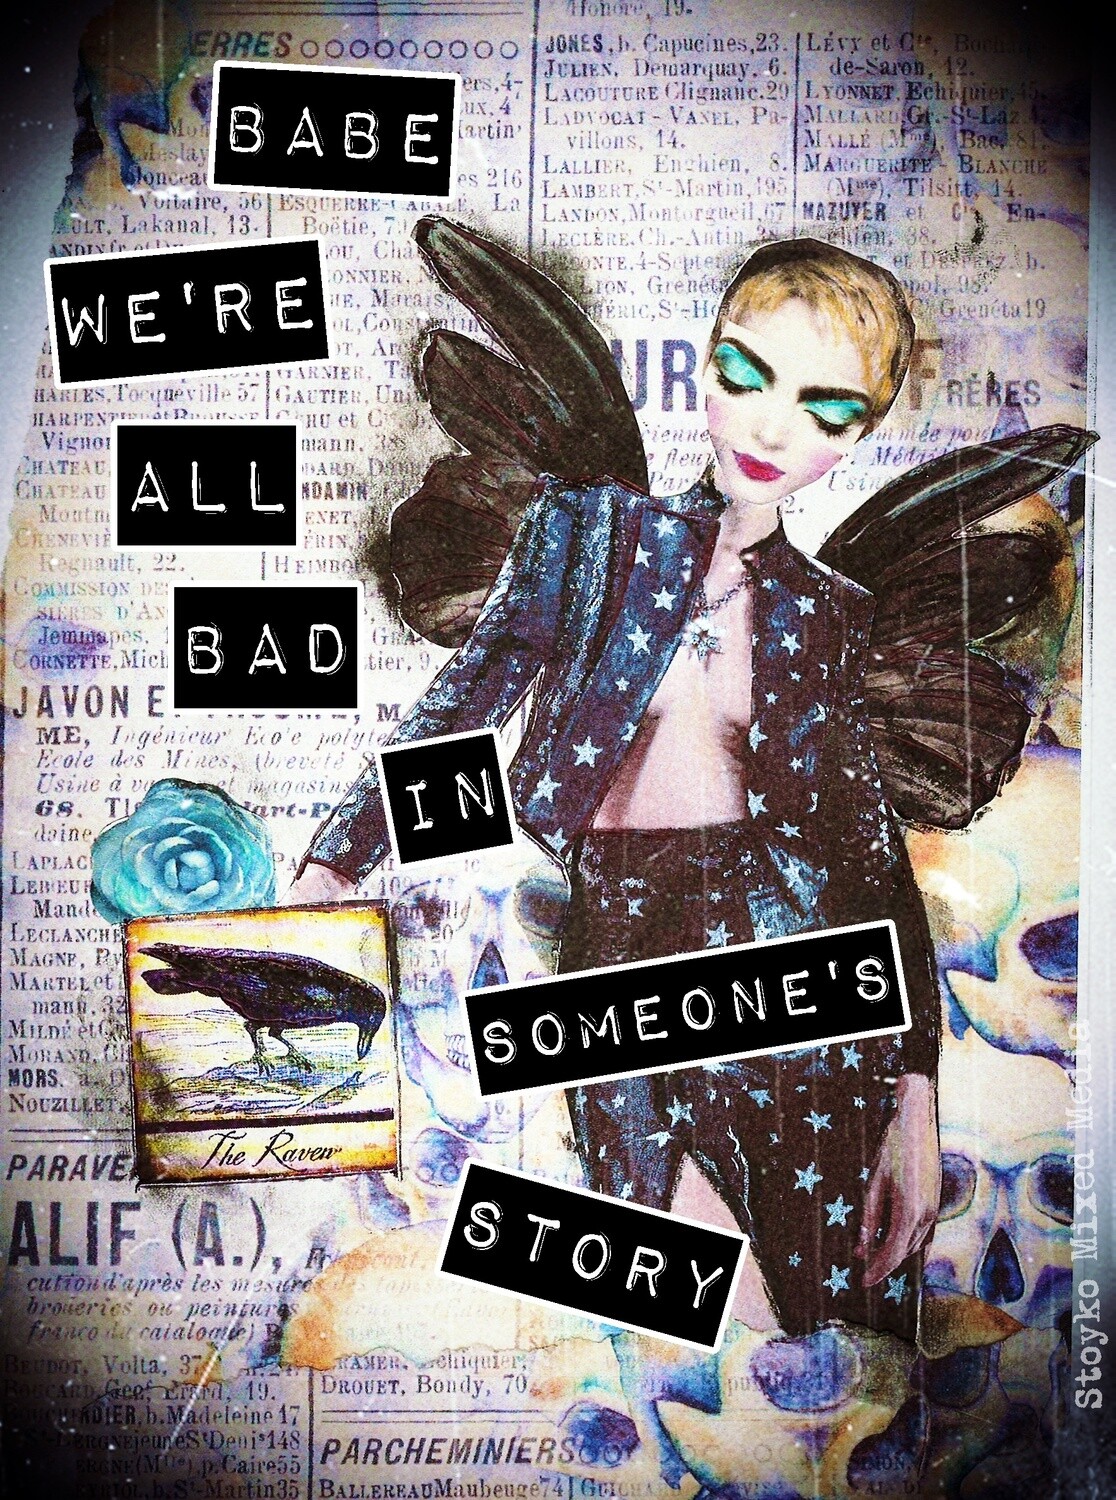 Babe, We're all bad...